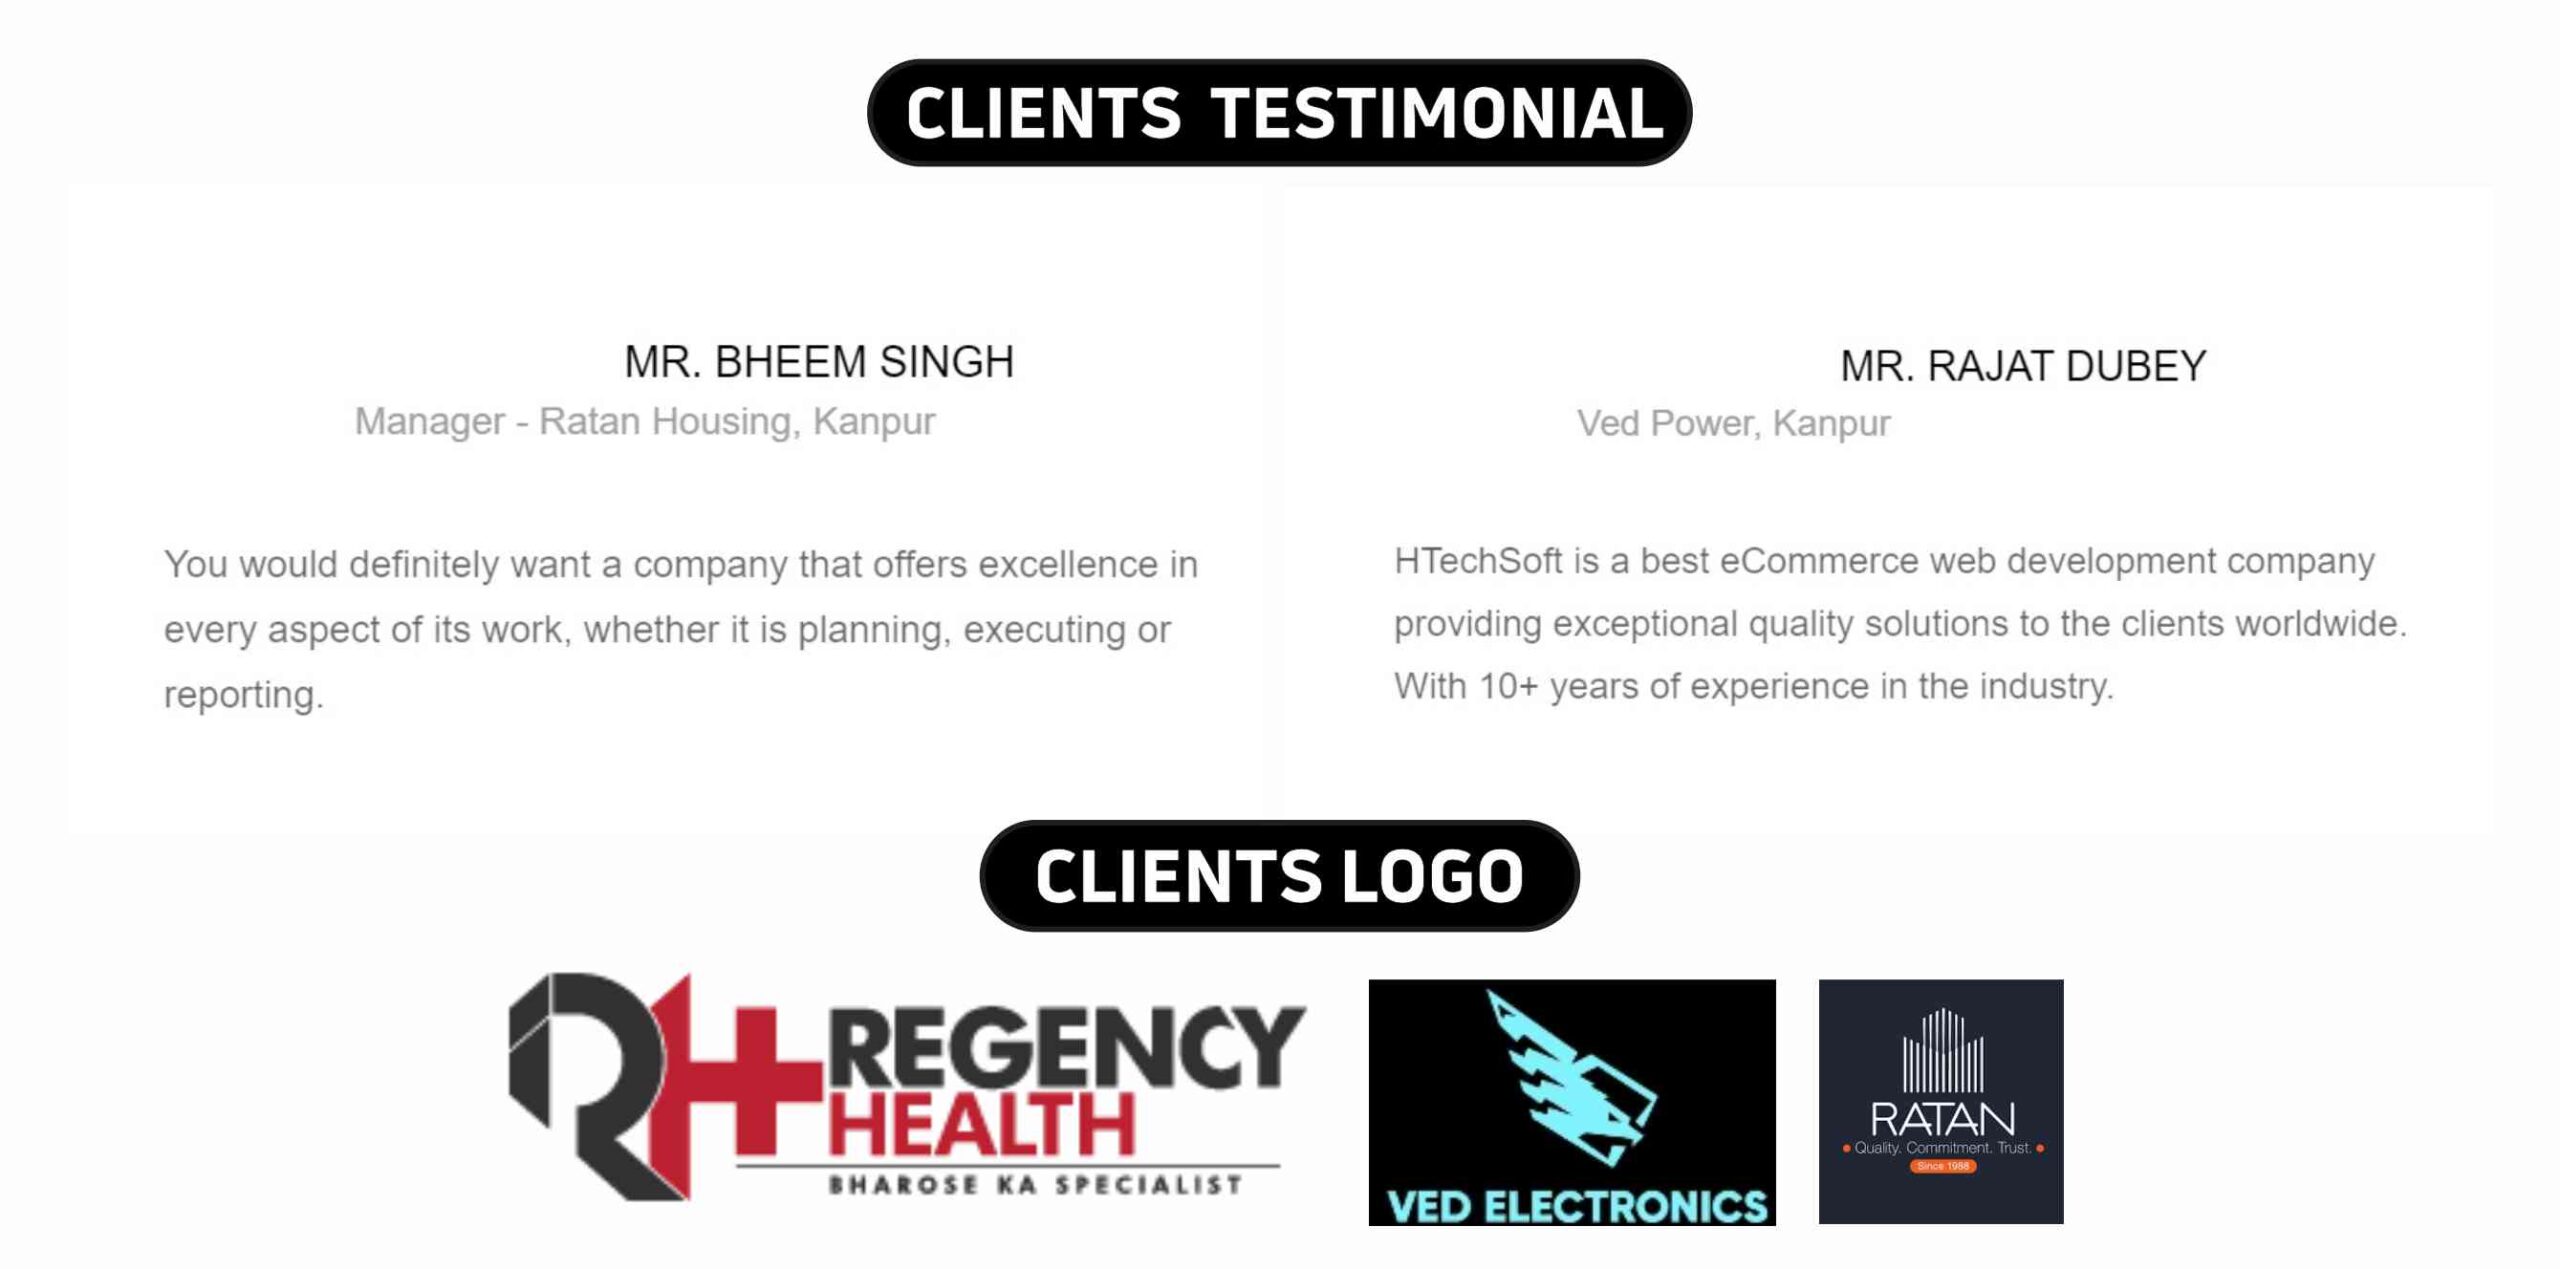 HTechSoft Software Company in Kanpur Clients Testimonials & Logos